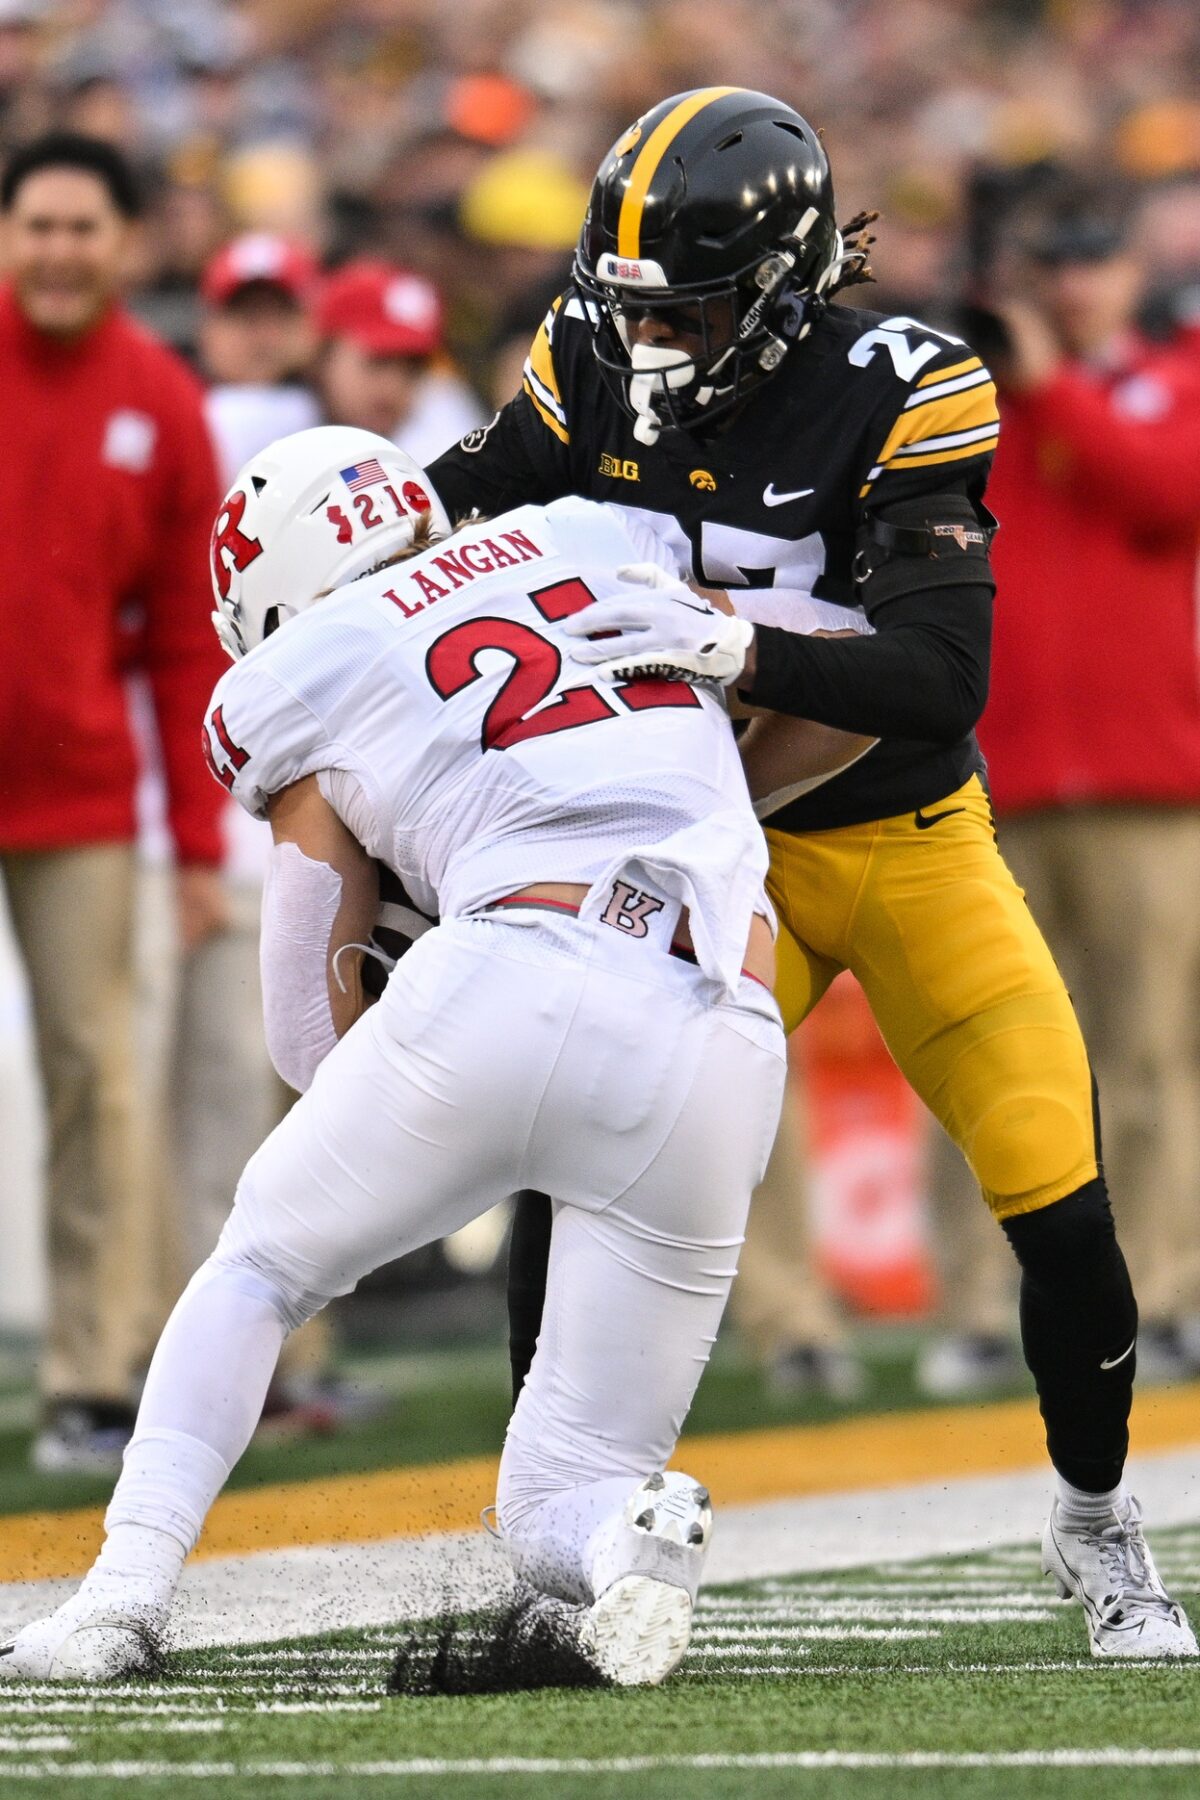 Week 11: The five takeaways from Rutgers football’s 22-0 loss to No. 22 Iowa